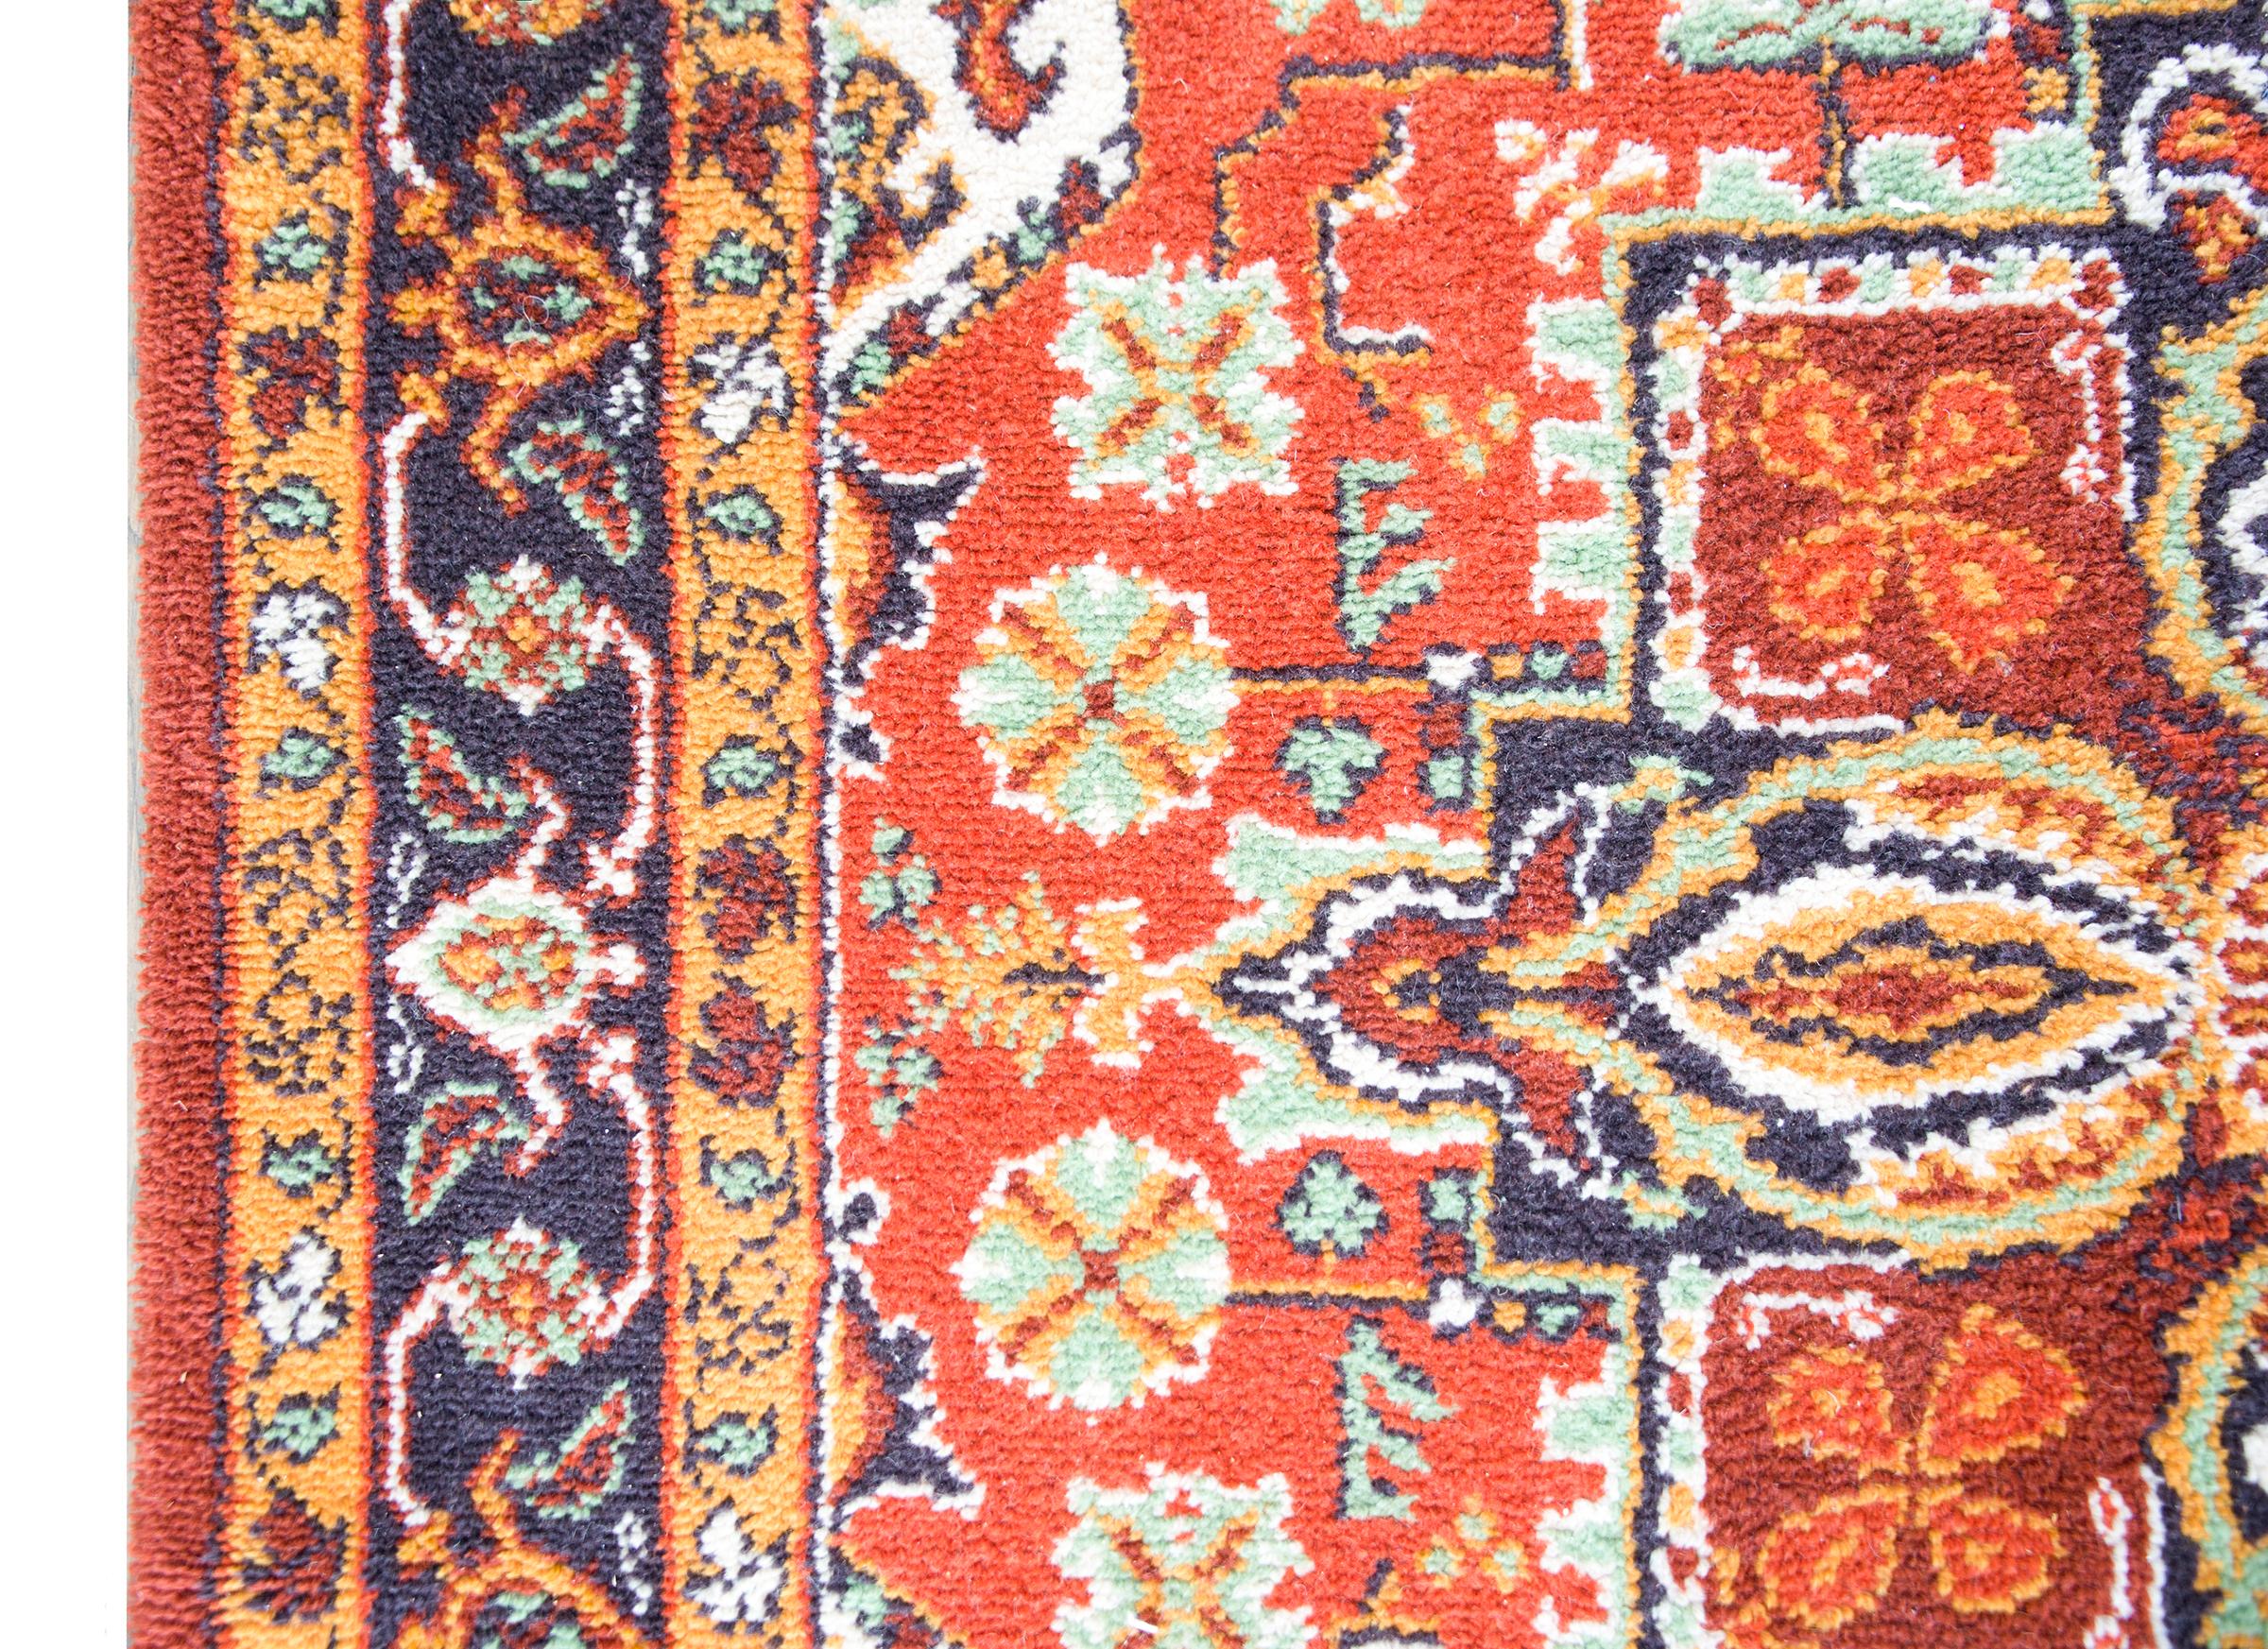 Vintage American Karistan Heriz-Style Rug In Good Condition For Sale In Chicago, IL